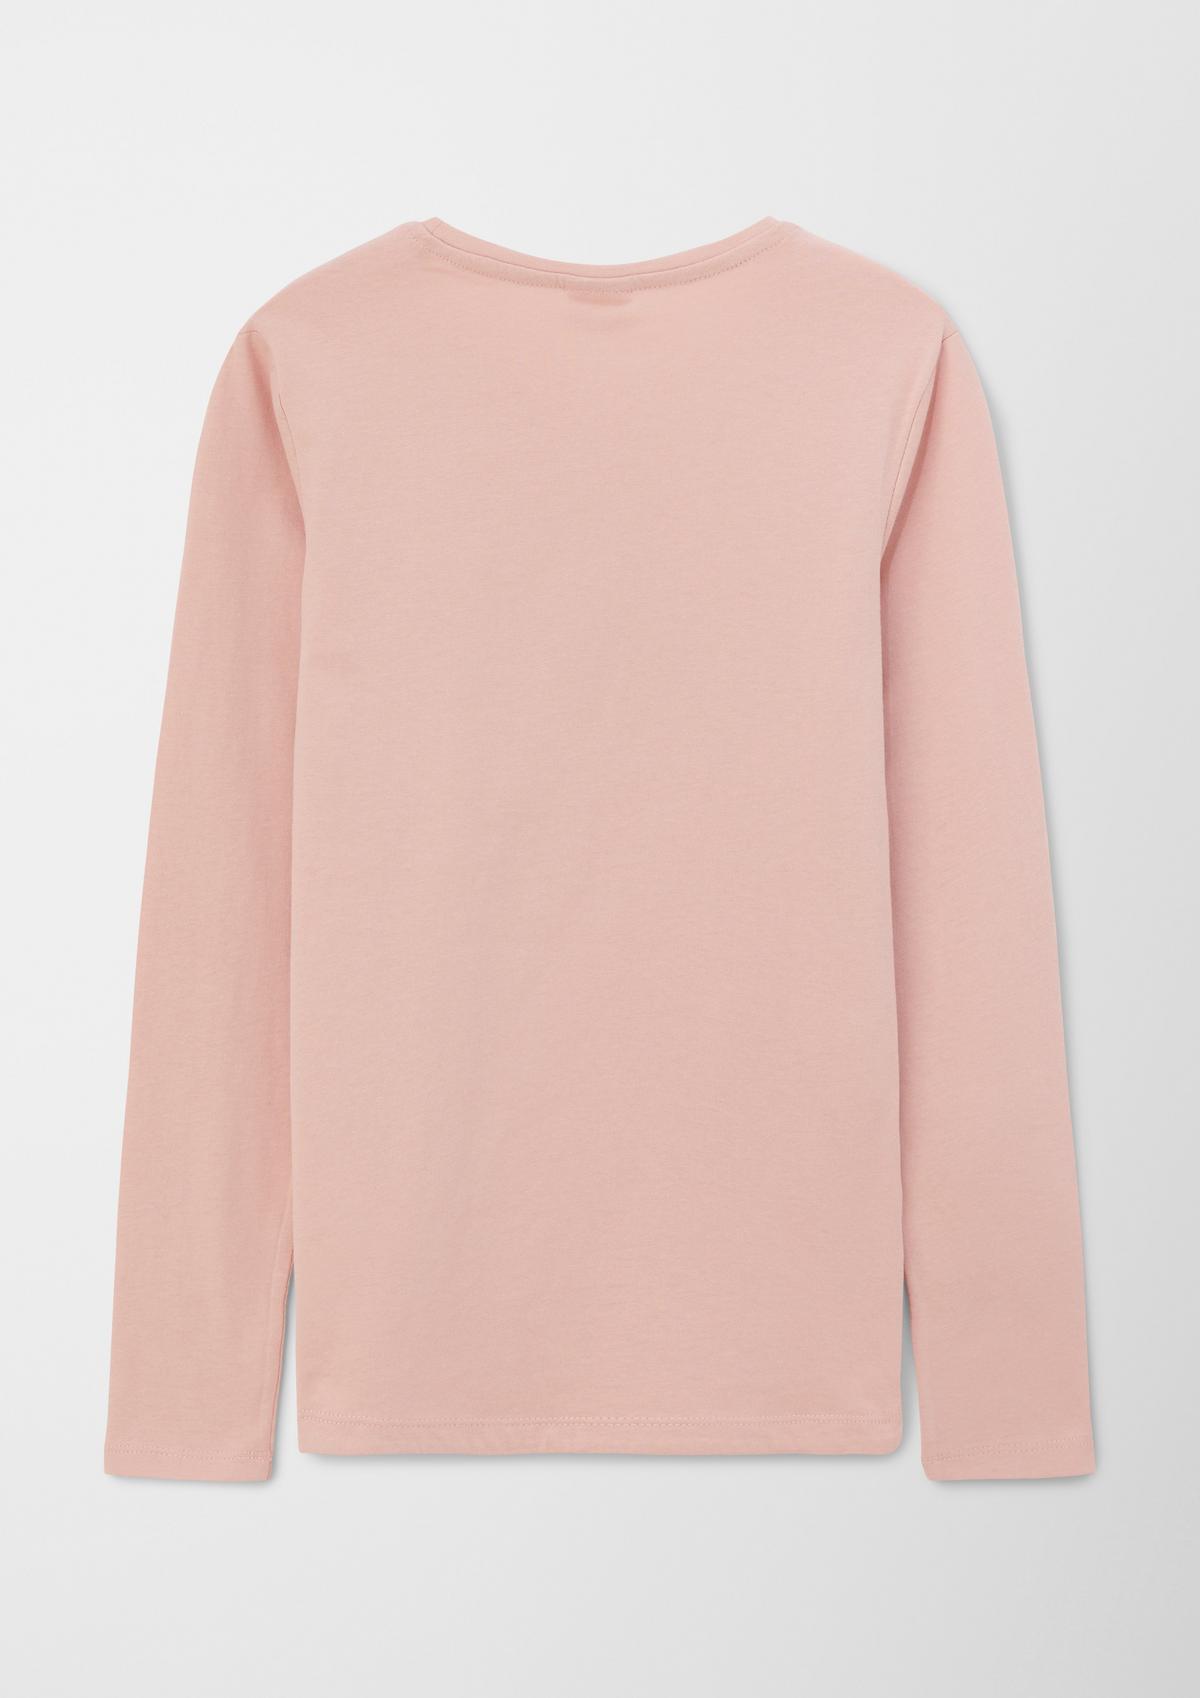 s.Oliver Long sleeve top with a rounded hem